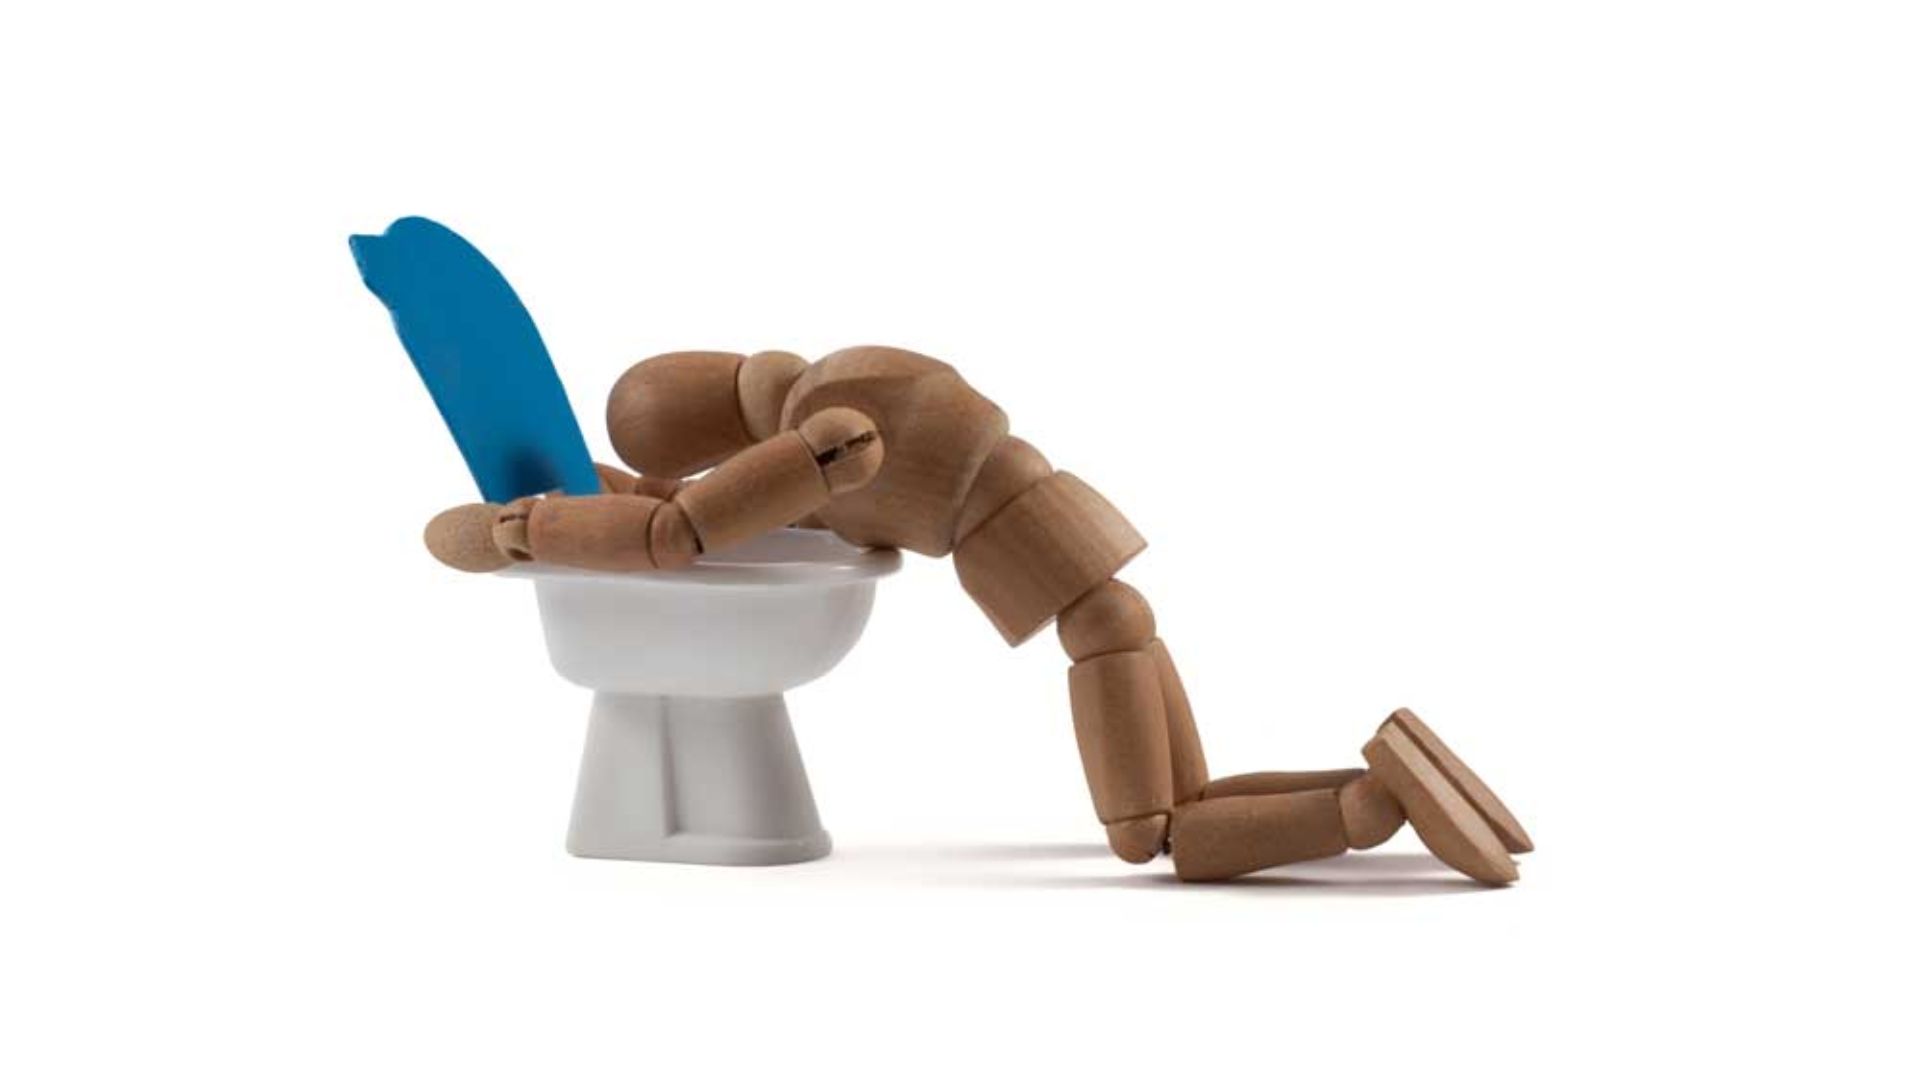 A Wooden Toy Vomiting On The Toilet Bowl